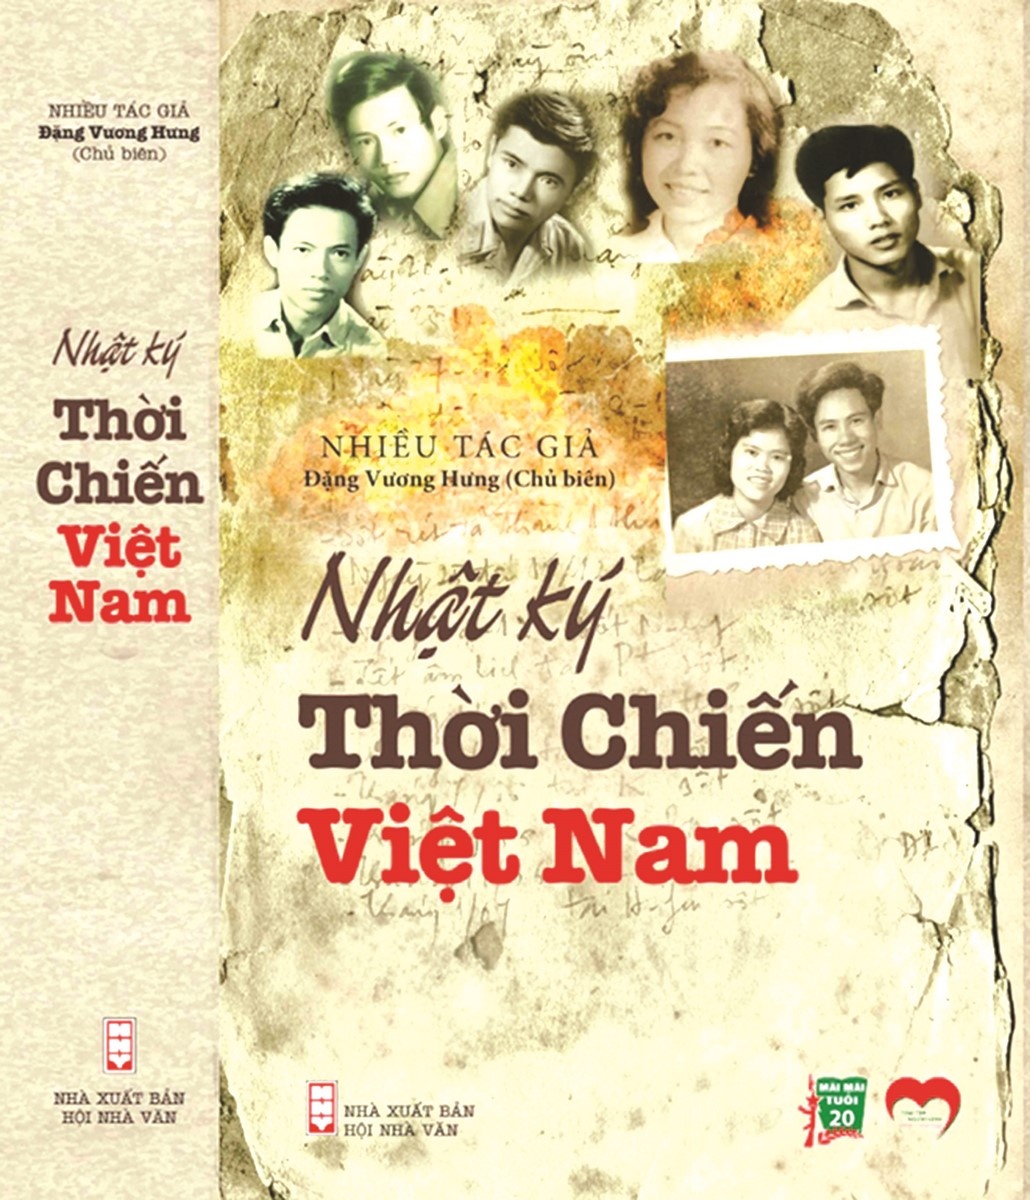 song mai nhat ky thoi chien viet nam